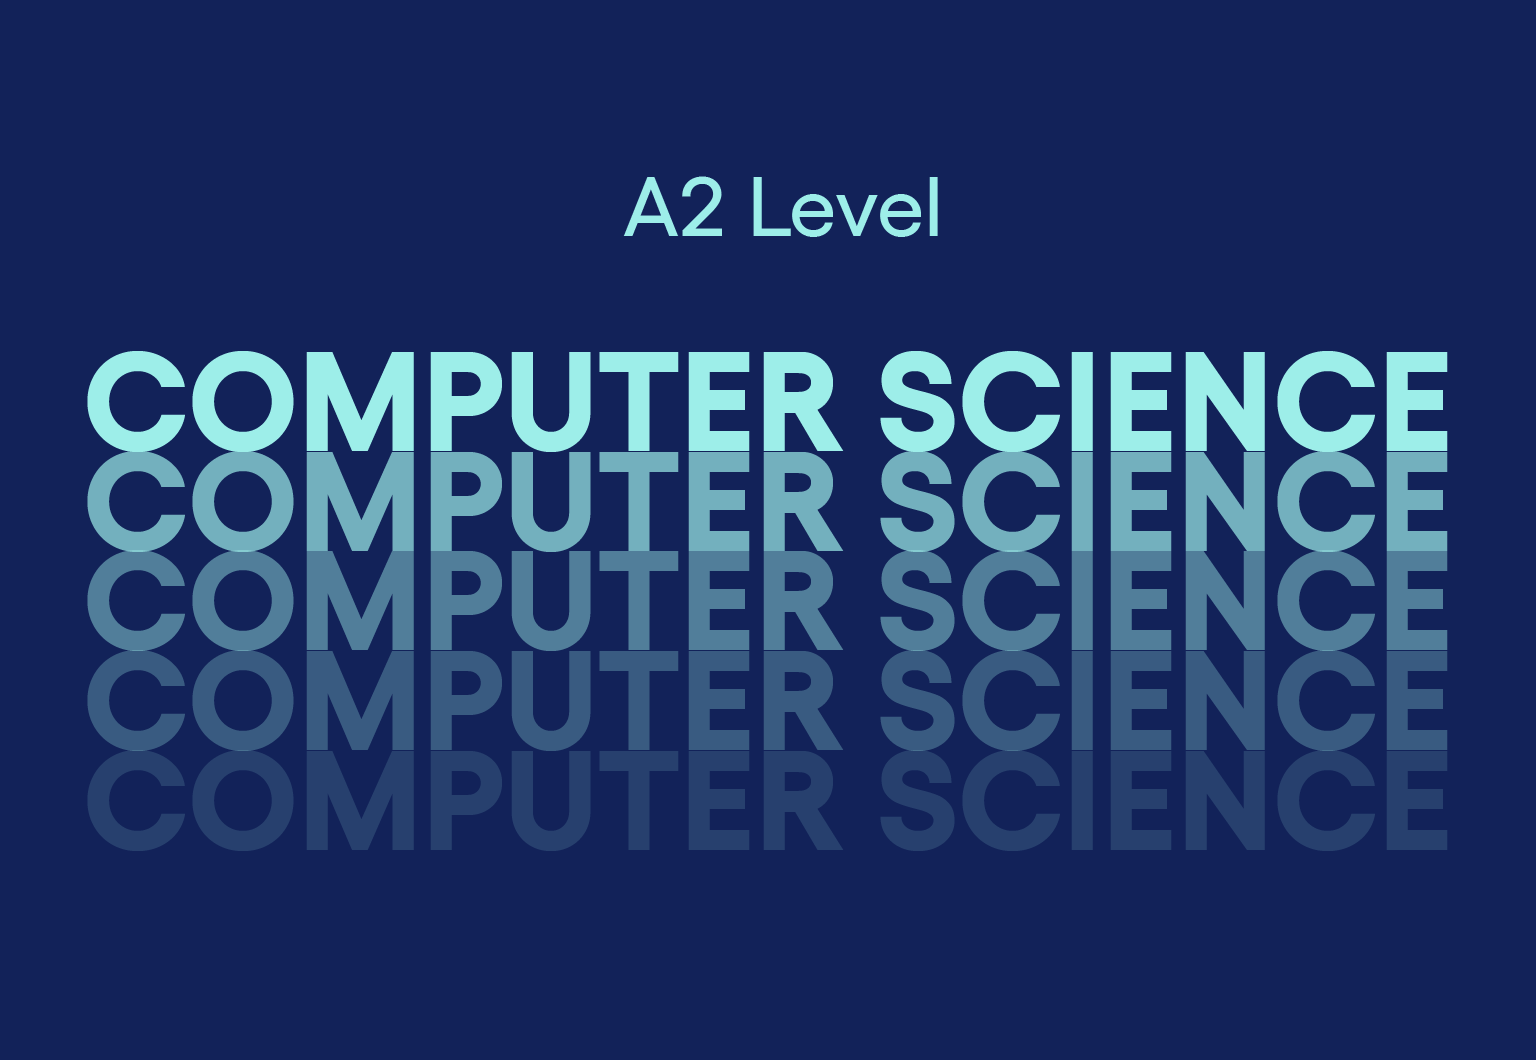 A2 Level Computer Science